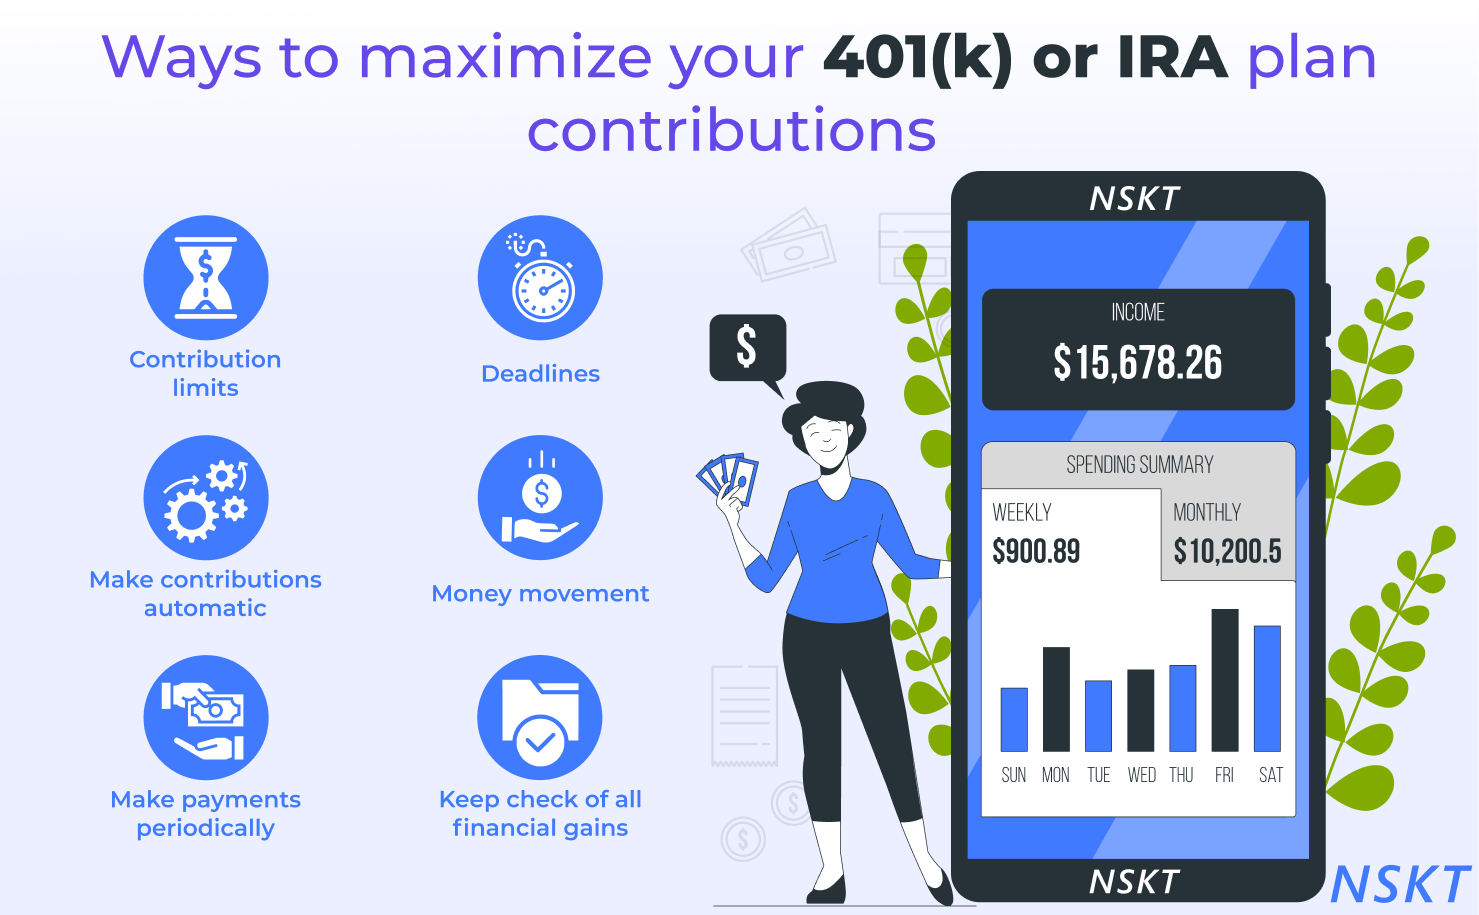 Ways to Maximize Your 401(k) or IRA Plan Contributions